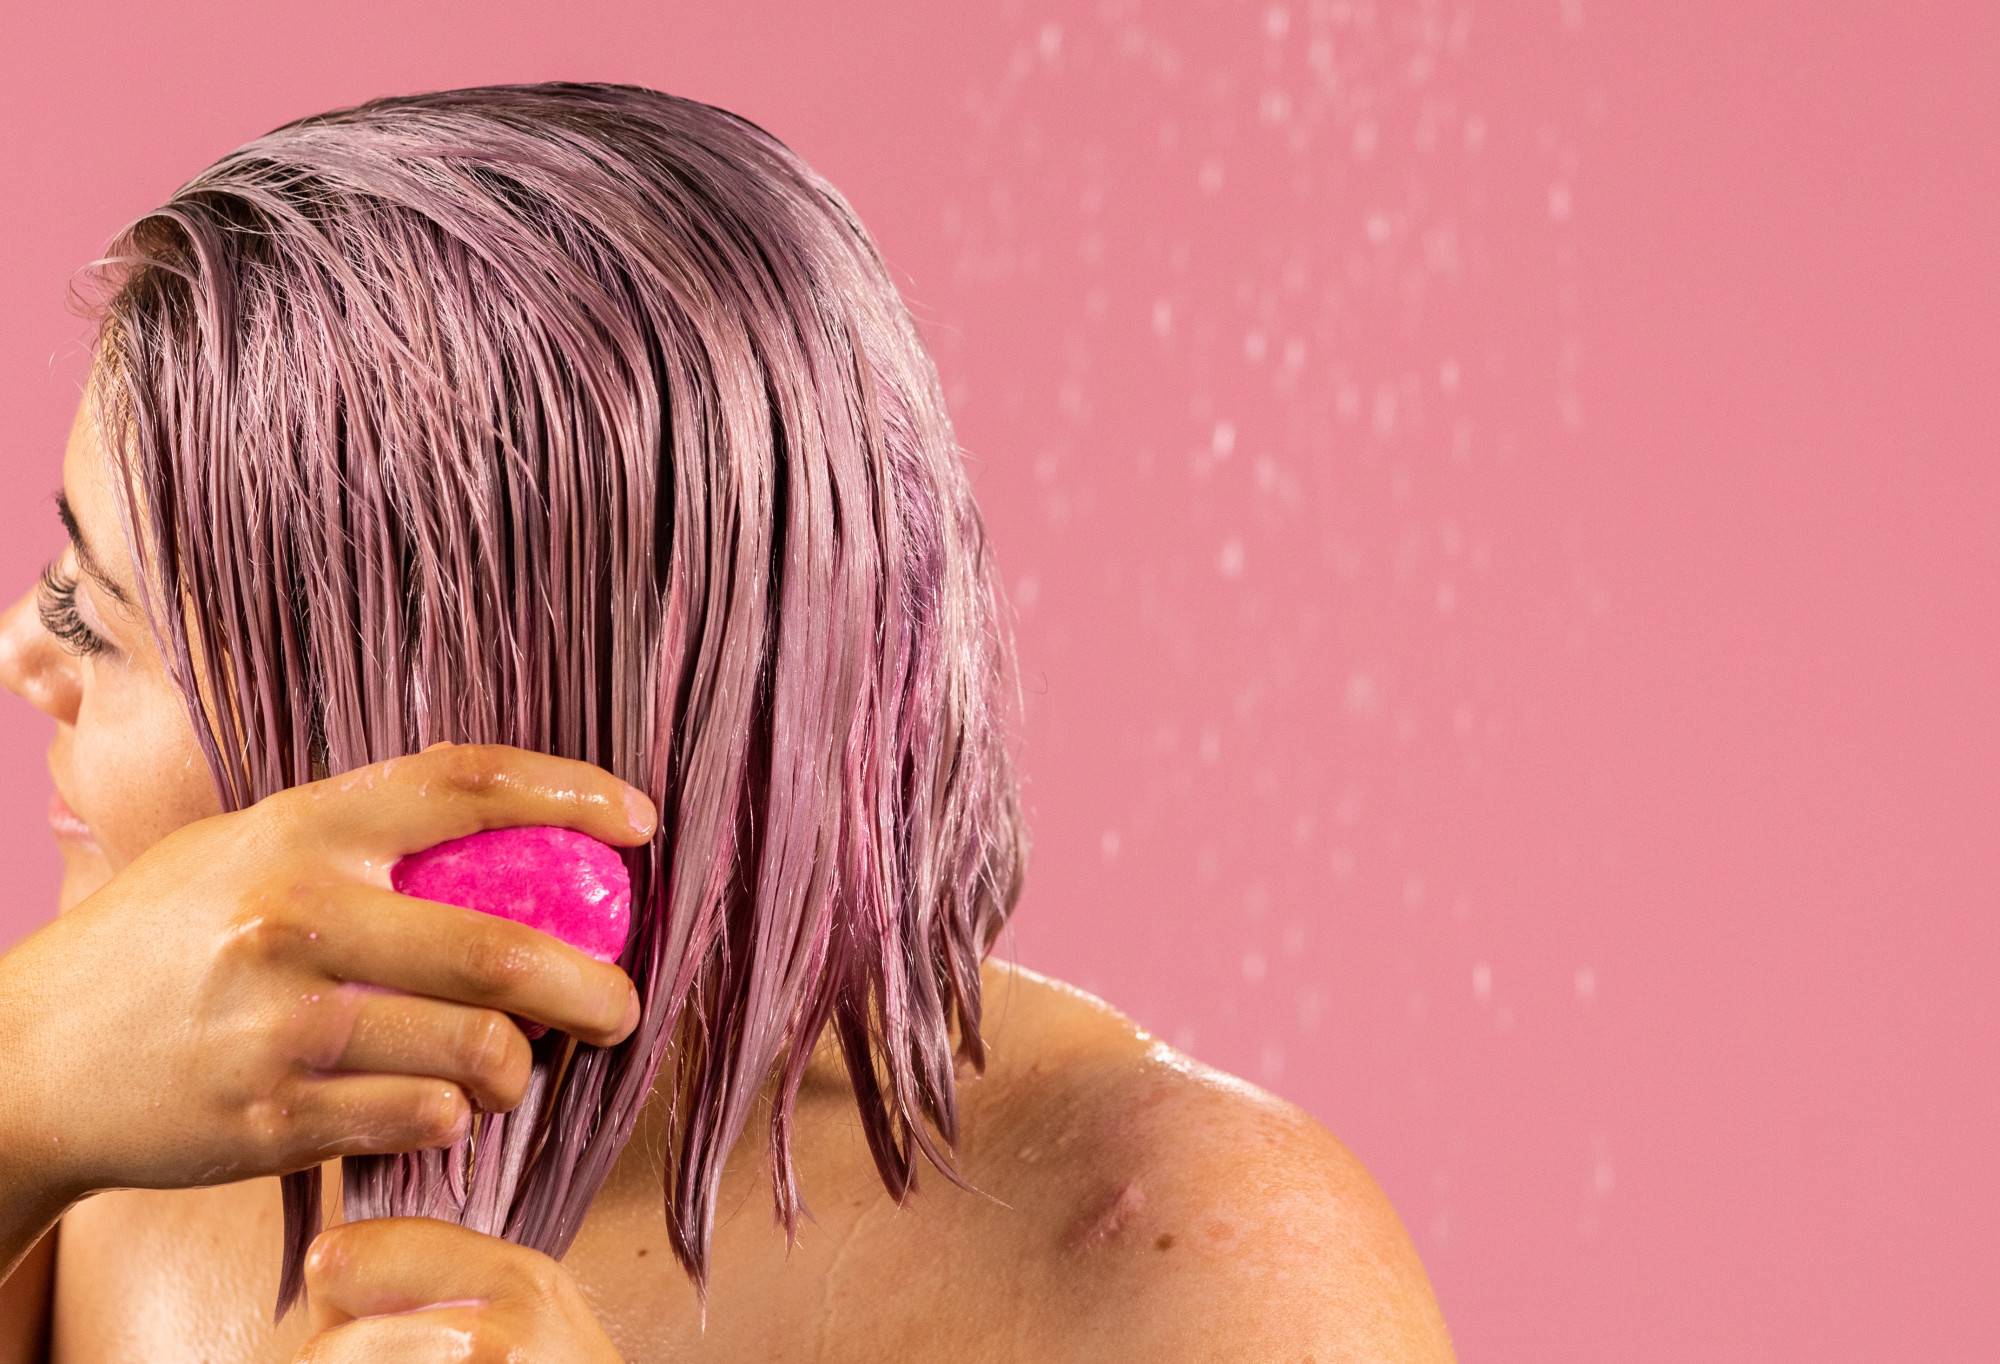 A person with bobbed pink hair works American Cream, a pink, oval shaped solid conditioner bar, through their hair.